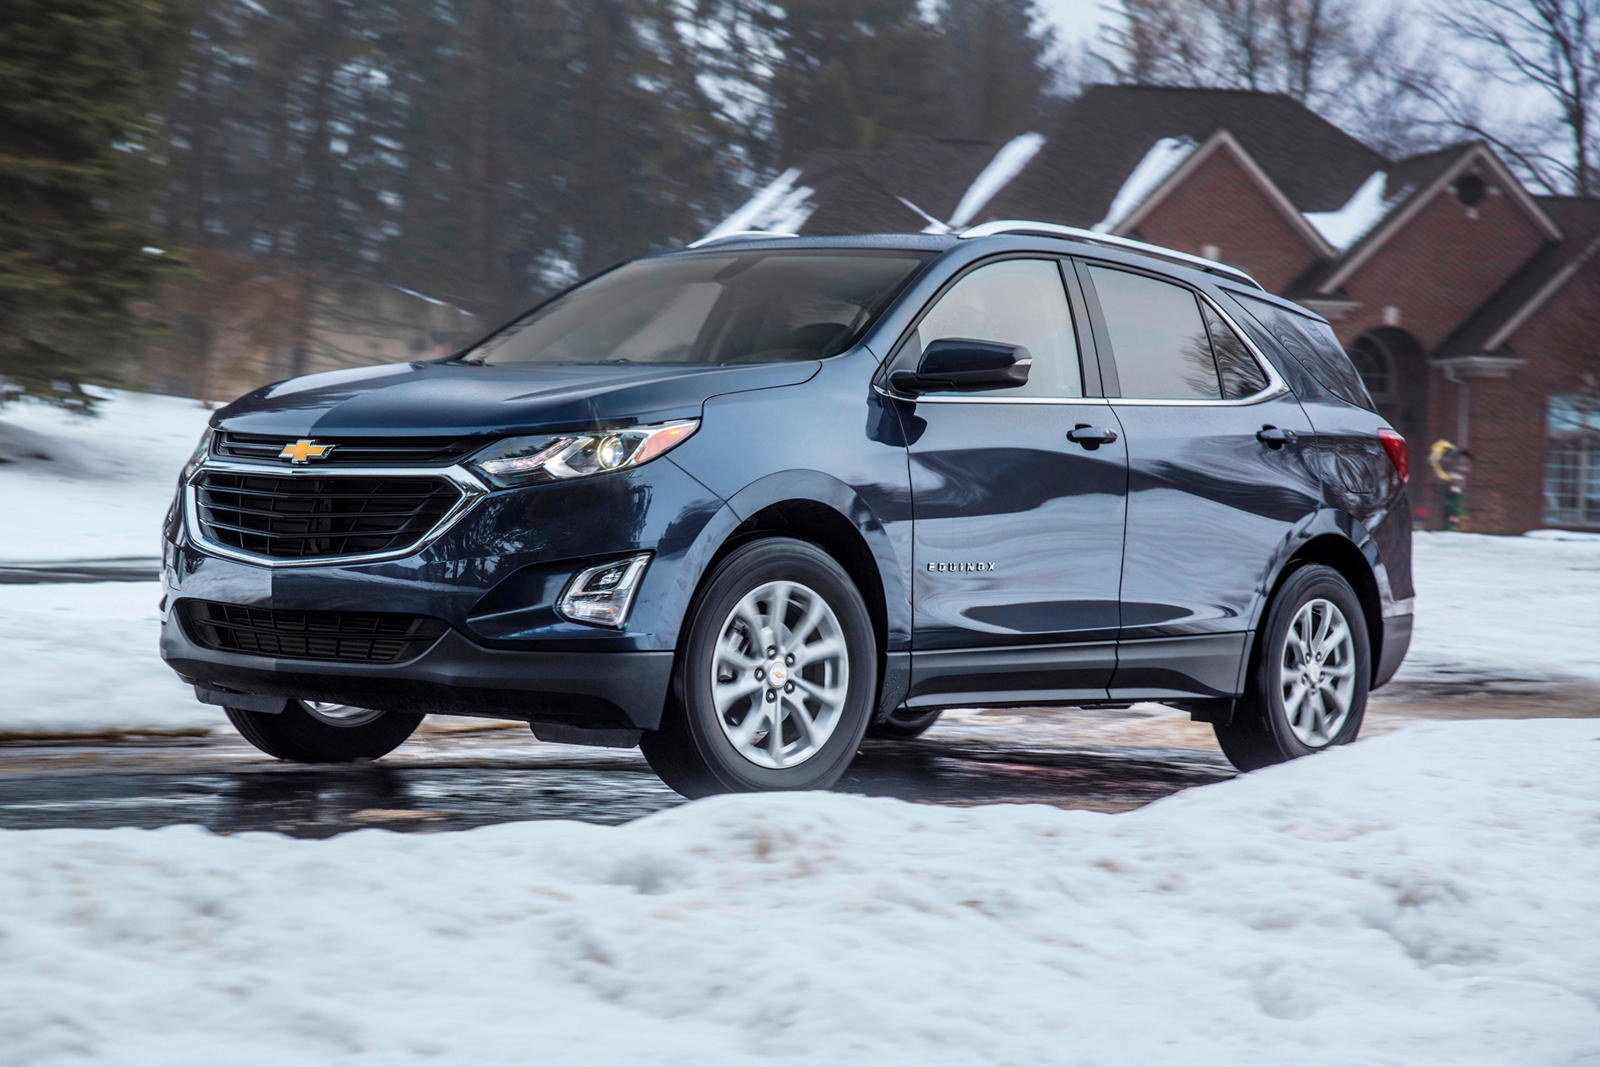 chevy-s-offering-sweet-discounts-on-the-equinox-right-now-carbuzz